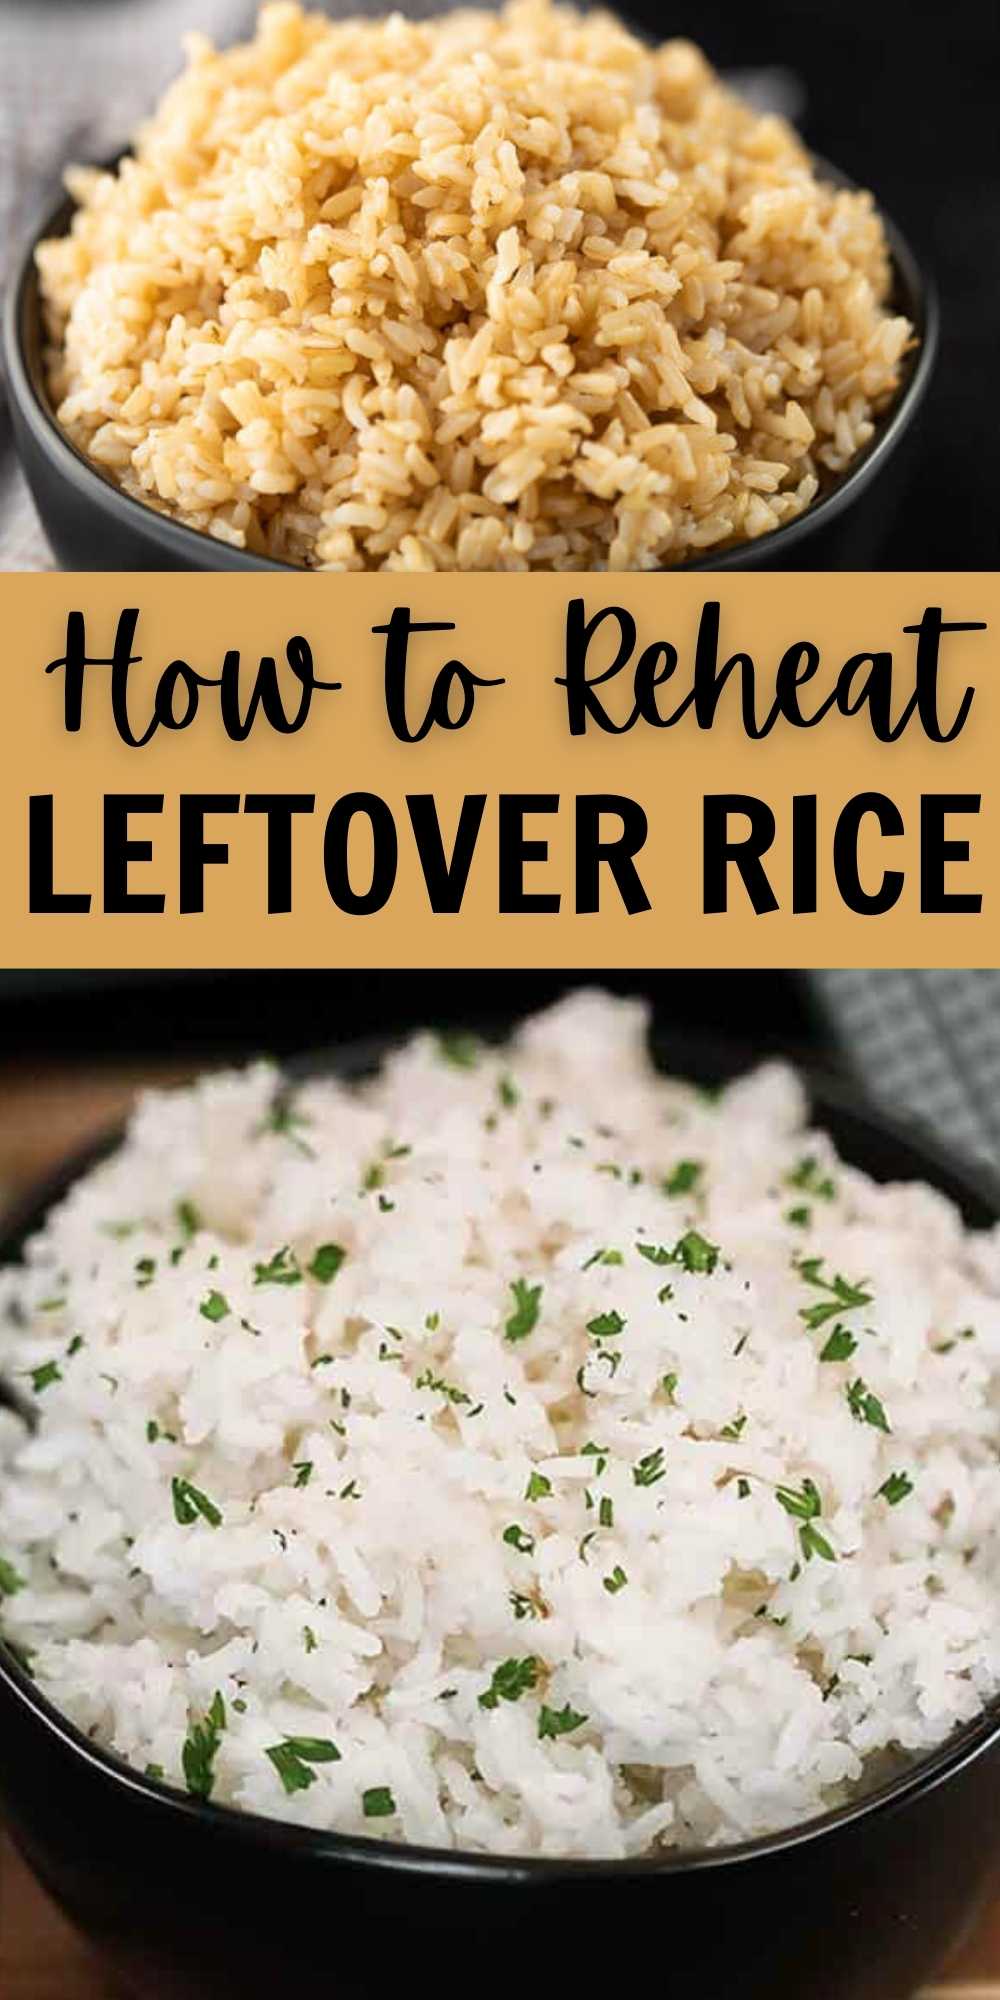 Learn How to Reheat Rice so you can enjoy soft and fluffy leftover rice again. These tips will help you enjoy rice the second time around. Reheat leftover rice in the stove or oven for fluffy and soft rice. #eatingonadime #leftoverrice #howtoreheat